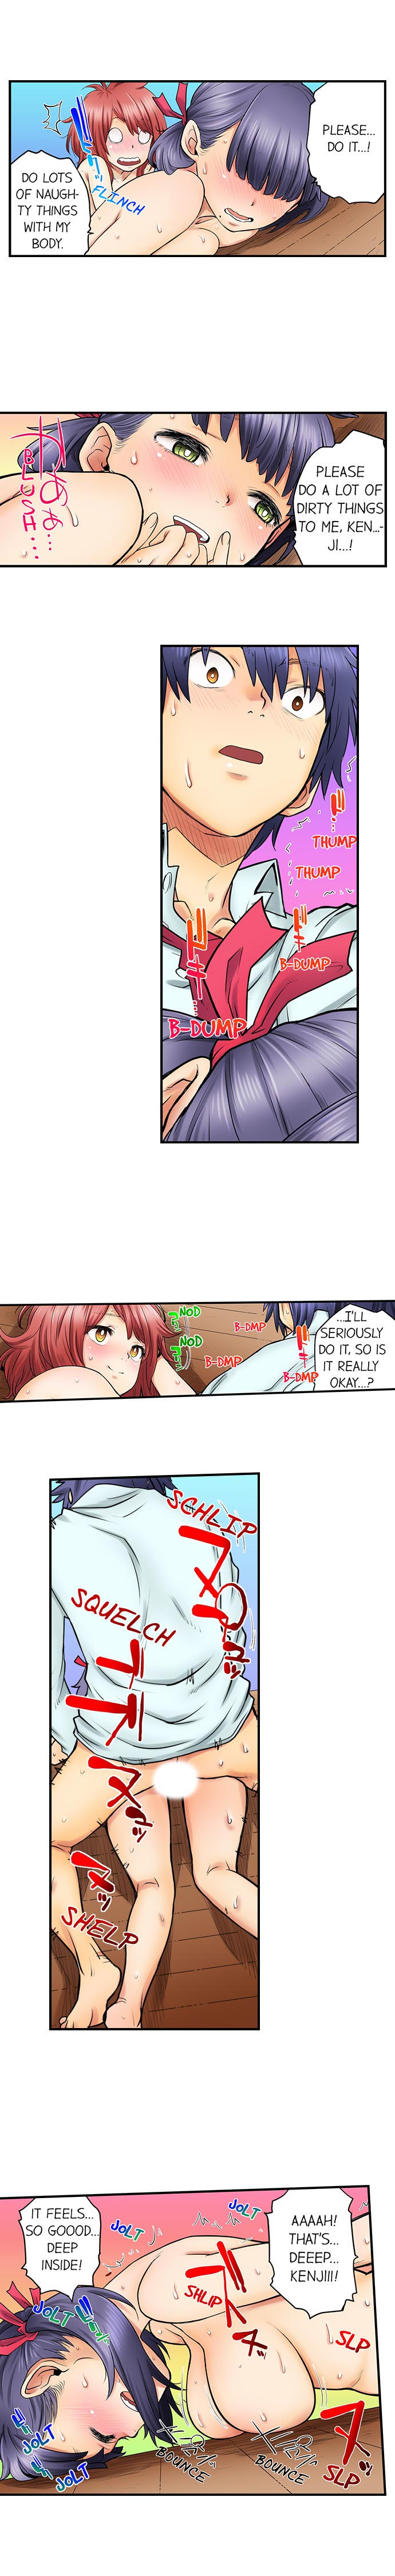 My Classmate is My Dad’s Bride, But in Bed She’s Mine - Chapter 16 Page 6